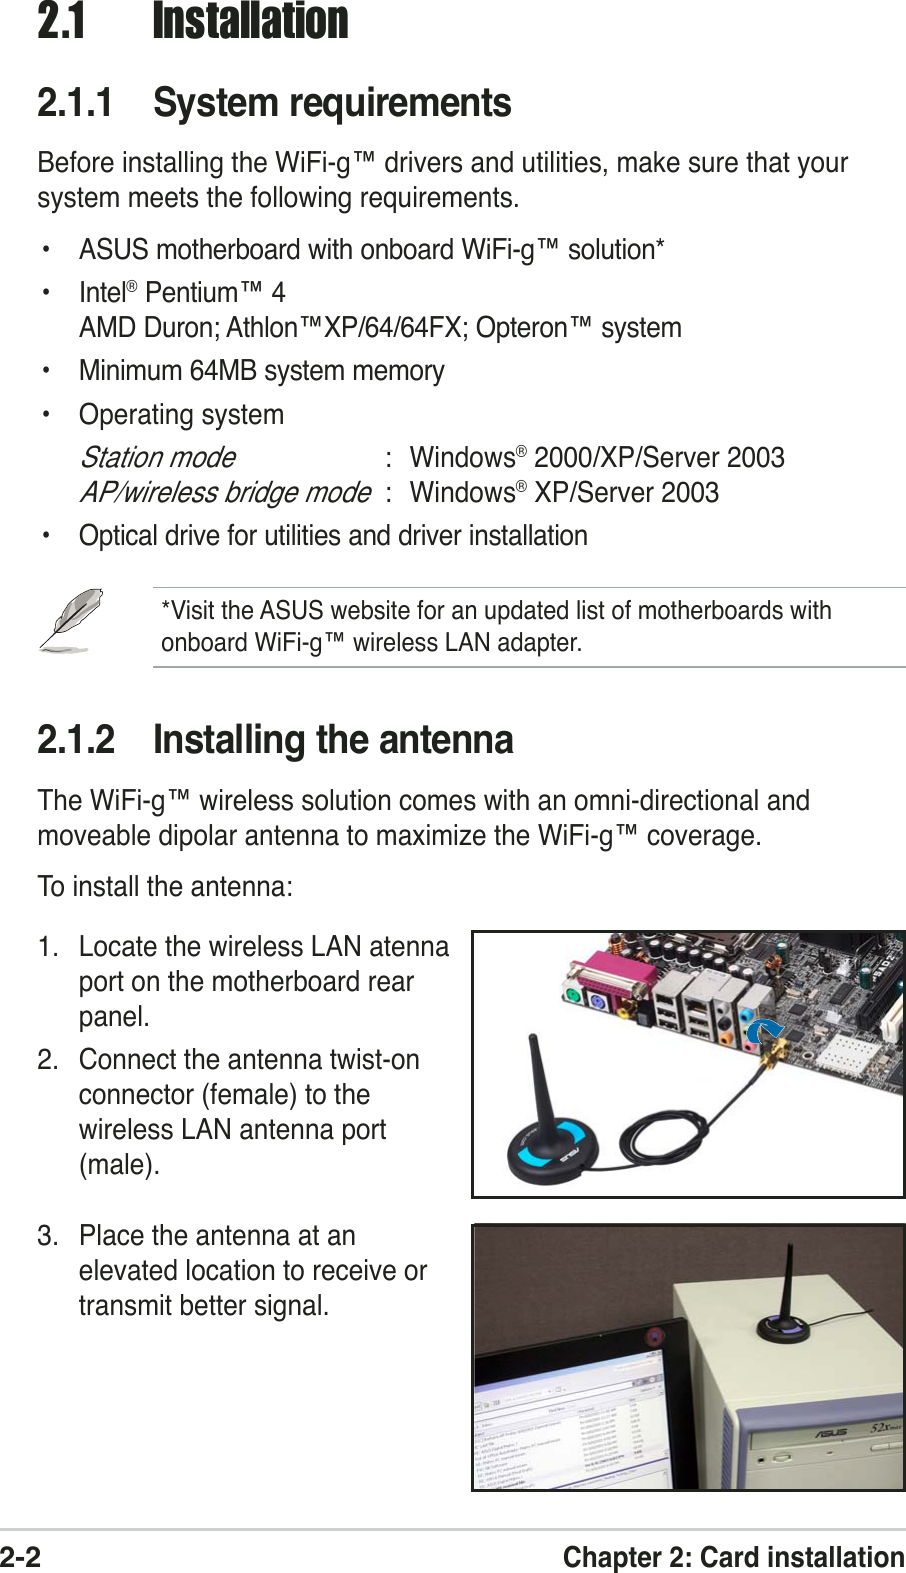 2-2Chapter 2: Card installation2.1 Installation2.1.1 System requirementsBefore installing the WiFi-g™ drivers and utilities, make sure that yoursystem meets the following requirements.• ASUS motherboard with onboard WiFi-g™ solution*• Intel® Pentium™ 4AMD Duron; Athlon™XP/64/64FX; Opteron™ system• Minimum 64MB system memory• Operating systemStation mode: Windows® 2000/XP/Server 2003AP/wireless bridge mode: Windows® XP/Server 2003• Optical drive for utilities and driver installation*Visit the ASUS website for an updated list of motherboards withonboard WiFi-g™ wireless LAN adapter.2.1.2 Installing the antennaThe WiFi-g™ wireless solution comes with an omni-directional andmoveable dipolar antenna to maximize the WiFi-g™ coverage.To install the antenna:1. Locate the wireless LAN atennaport on the motherboard rearpanel.2. Connect the antenna twist-onconnector (female) to thewireless LAN antenna port(male).3. Place the antenna at anelevated location to receive ortransmit better signal.